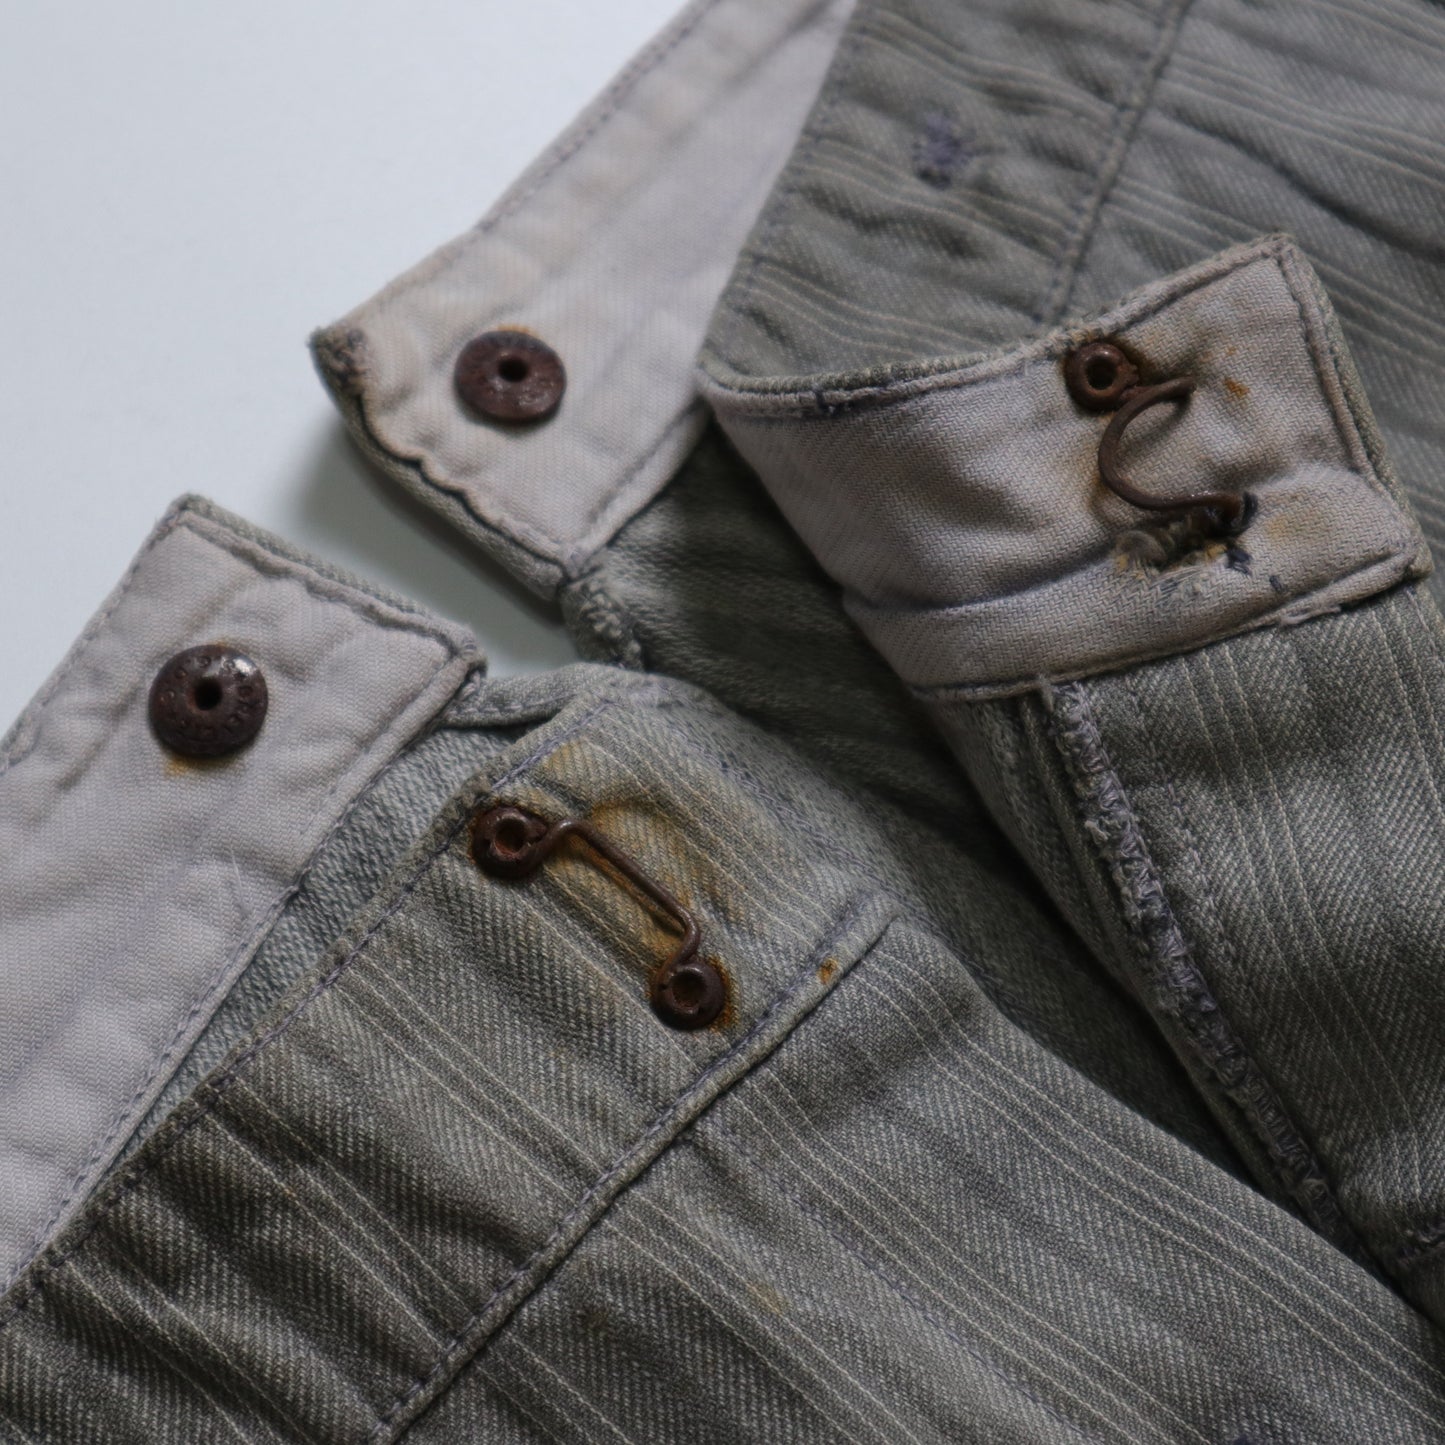 1930's French Striped work trousers 法國補丁工作褲